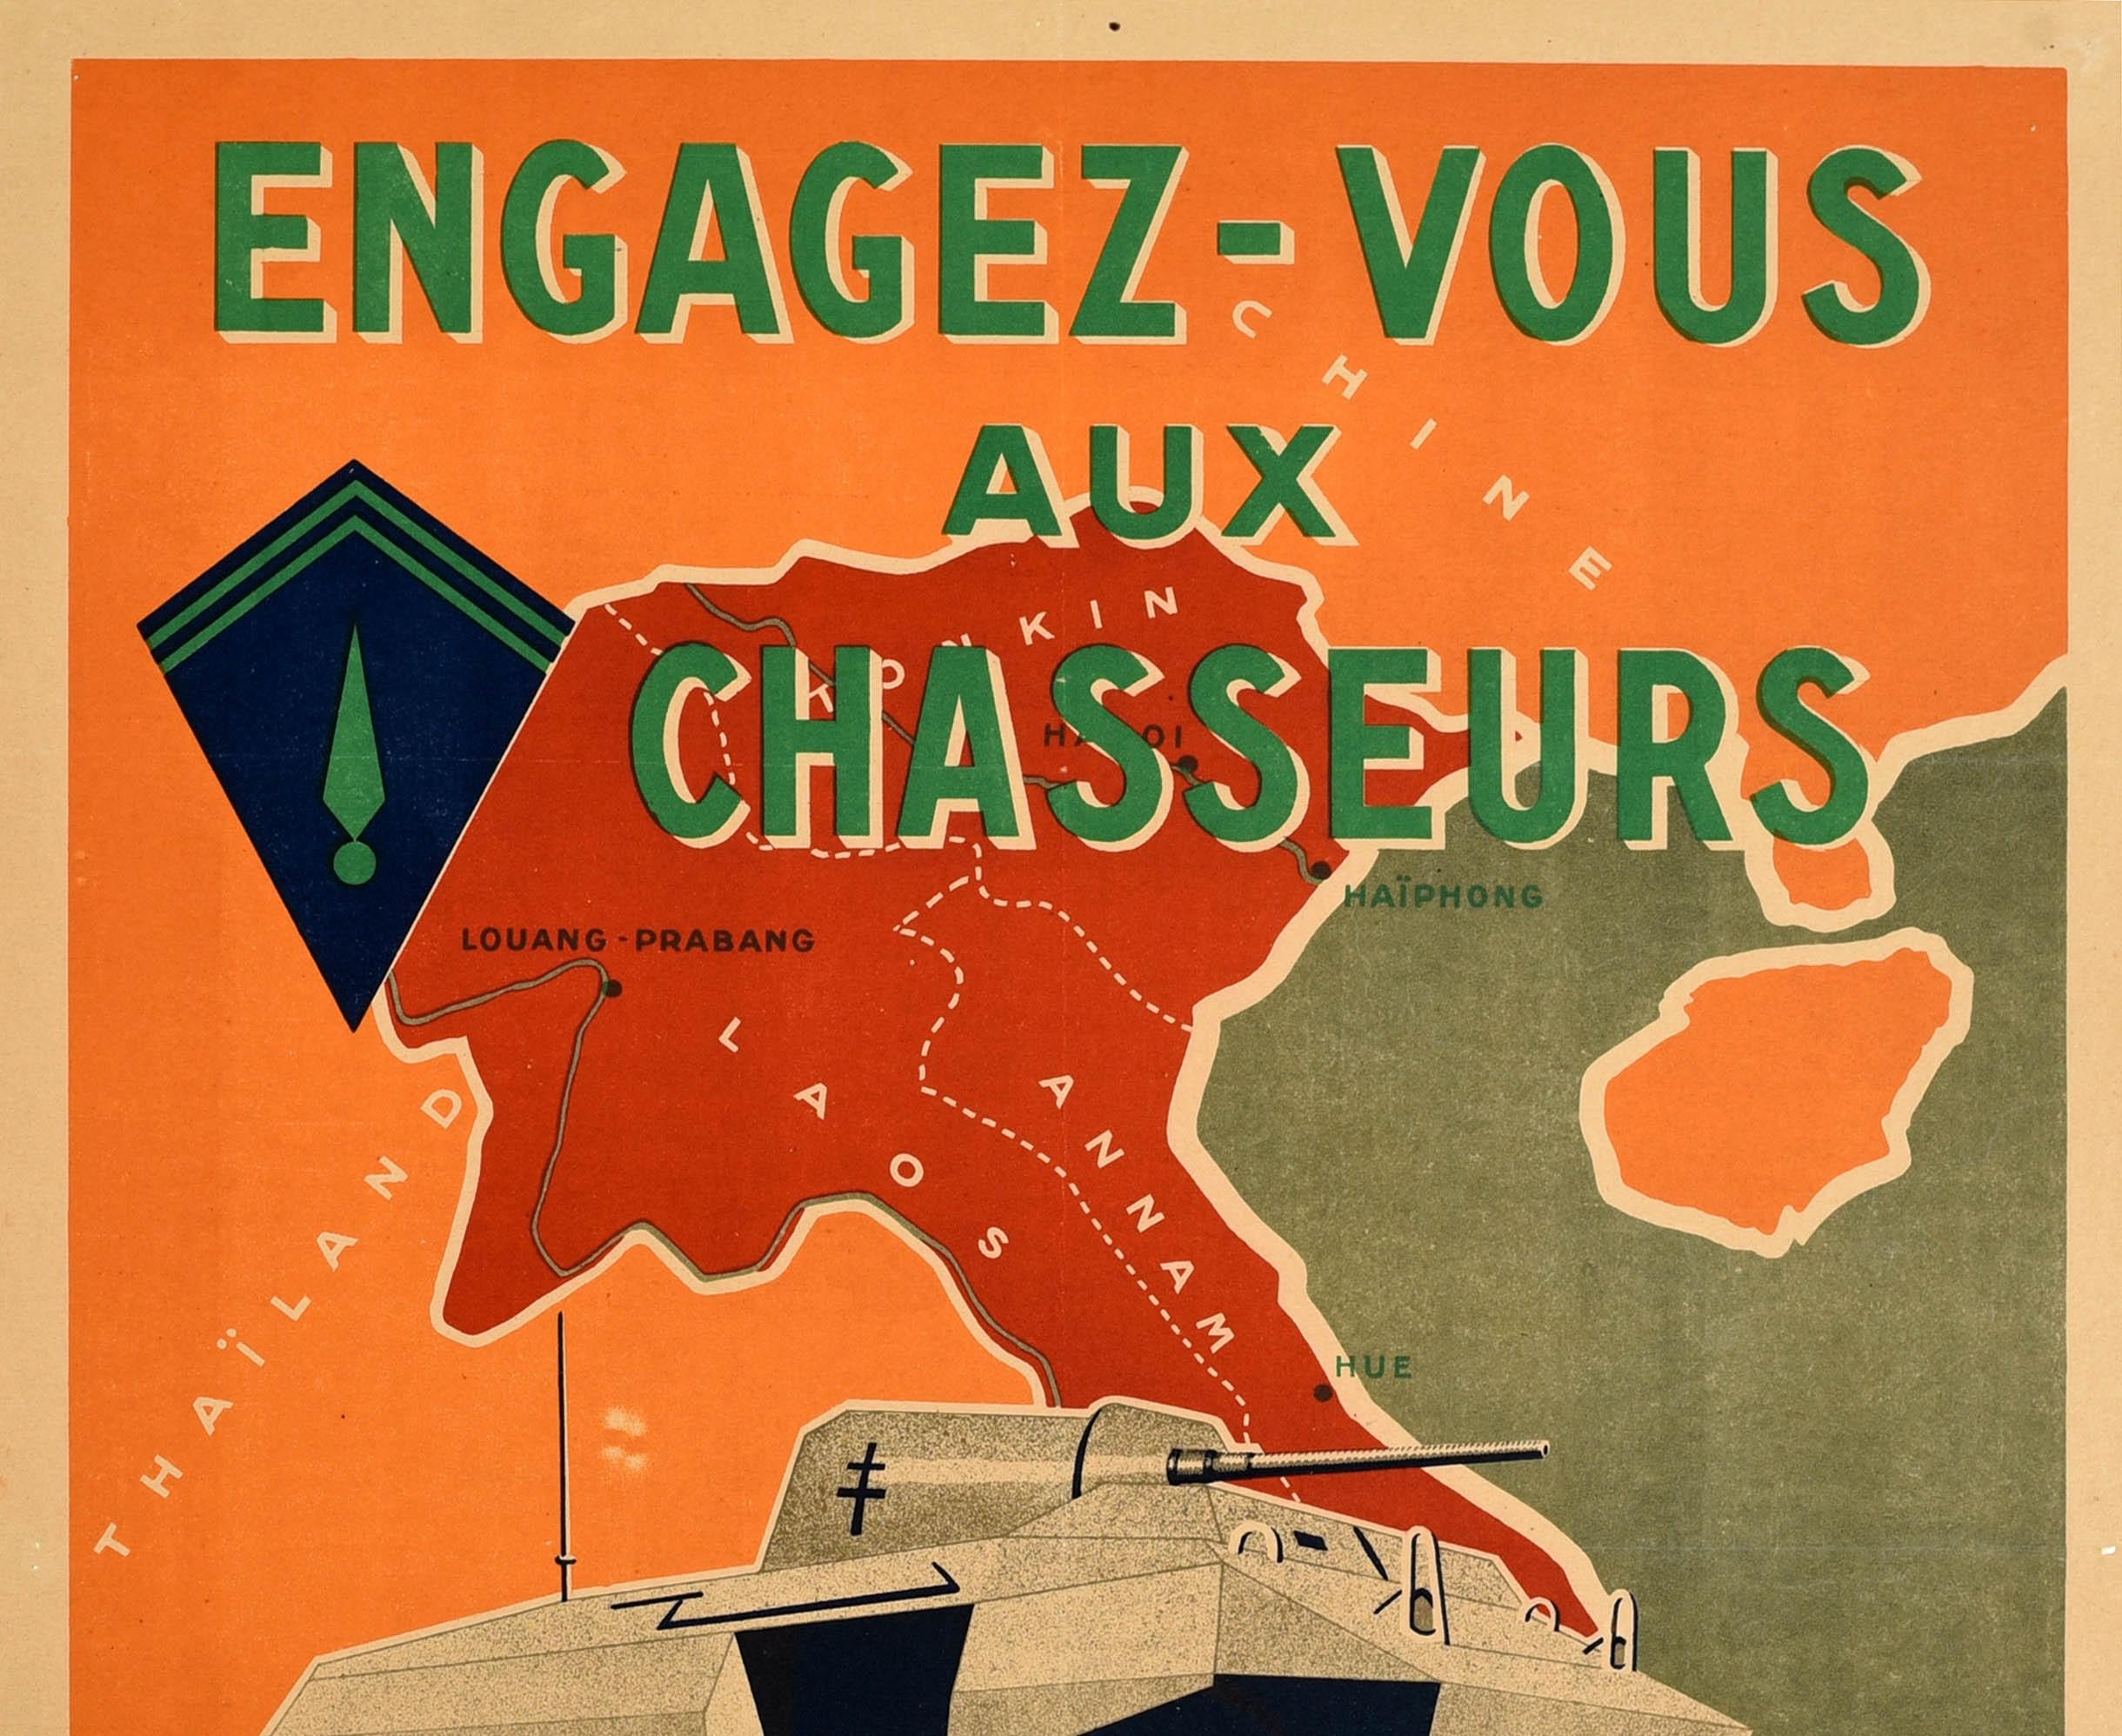 Original vintage French military recruitment poster - Join the Hunters of the 2nd Colonial Division of the Far East / Engagez-Vous Aux Chasseurs 2e Division Coloniale d'Extreme-Orient - featuring an image of a tank over a map of Vietnam and Cambodia